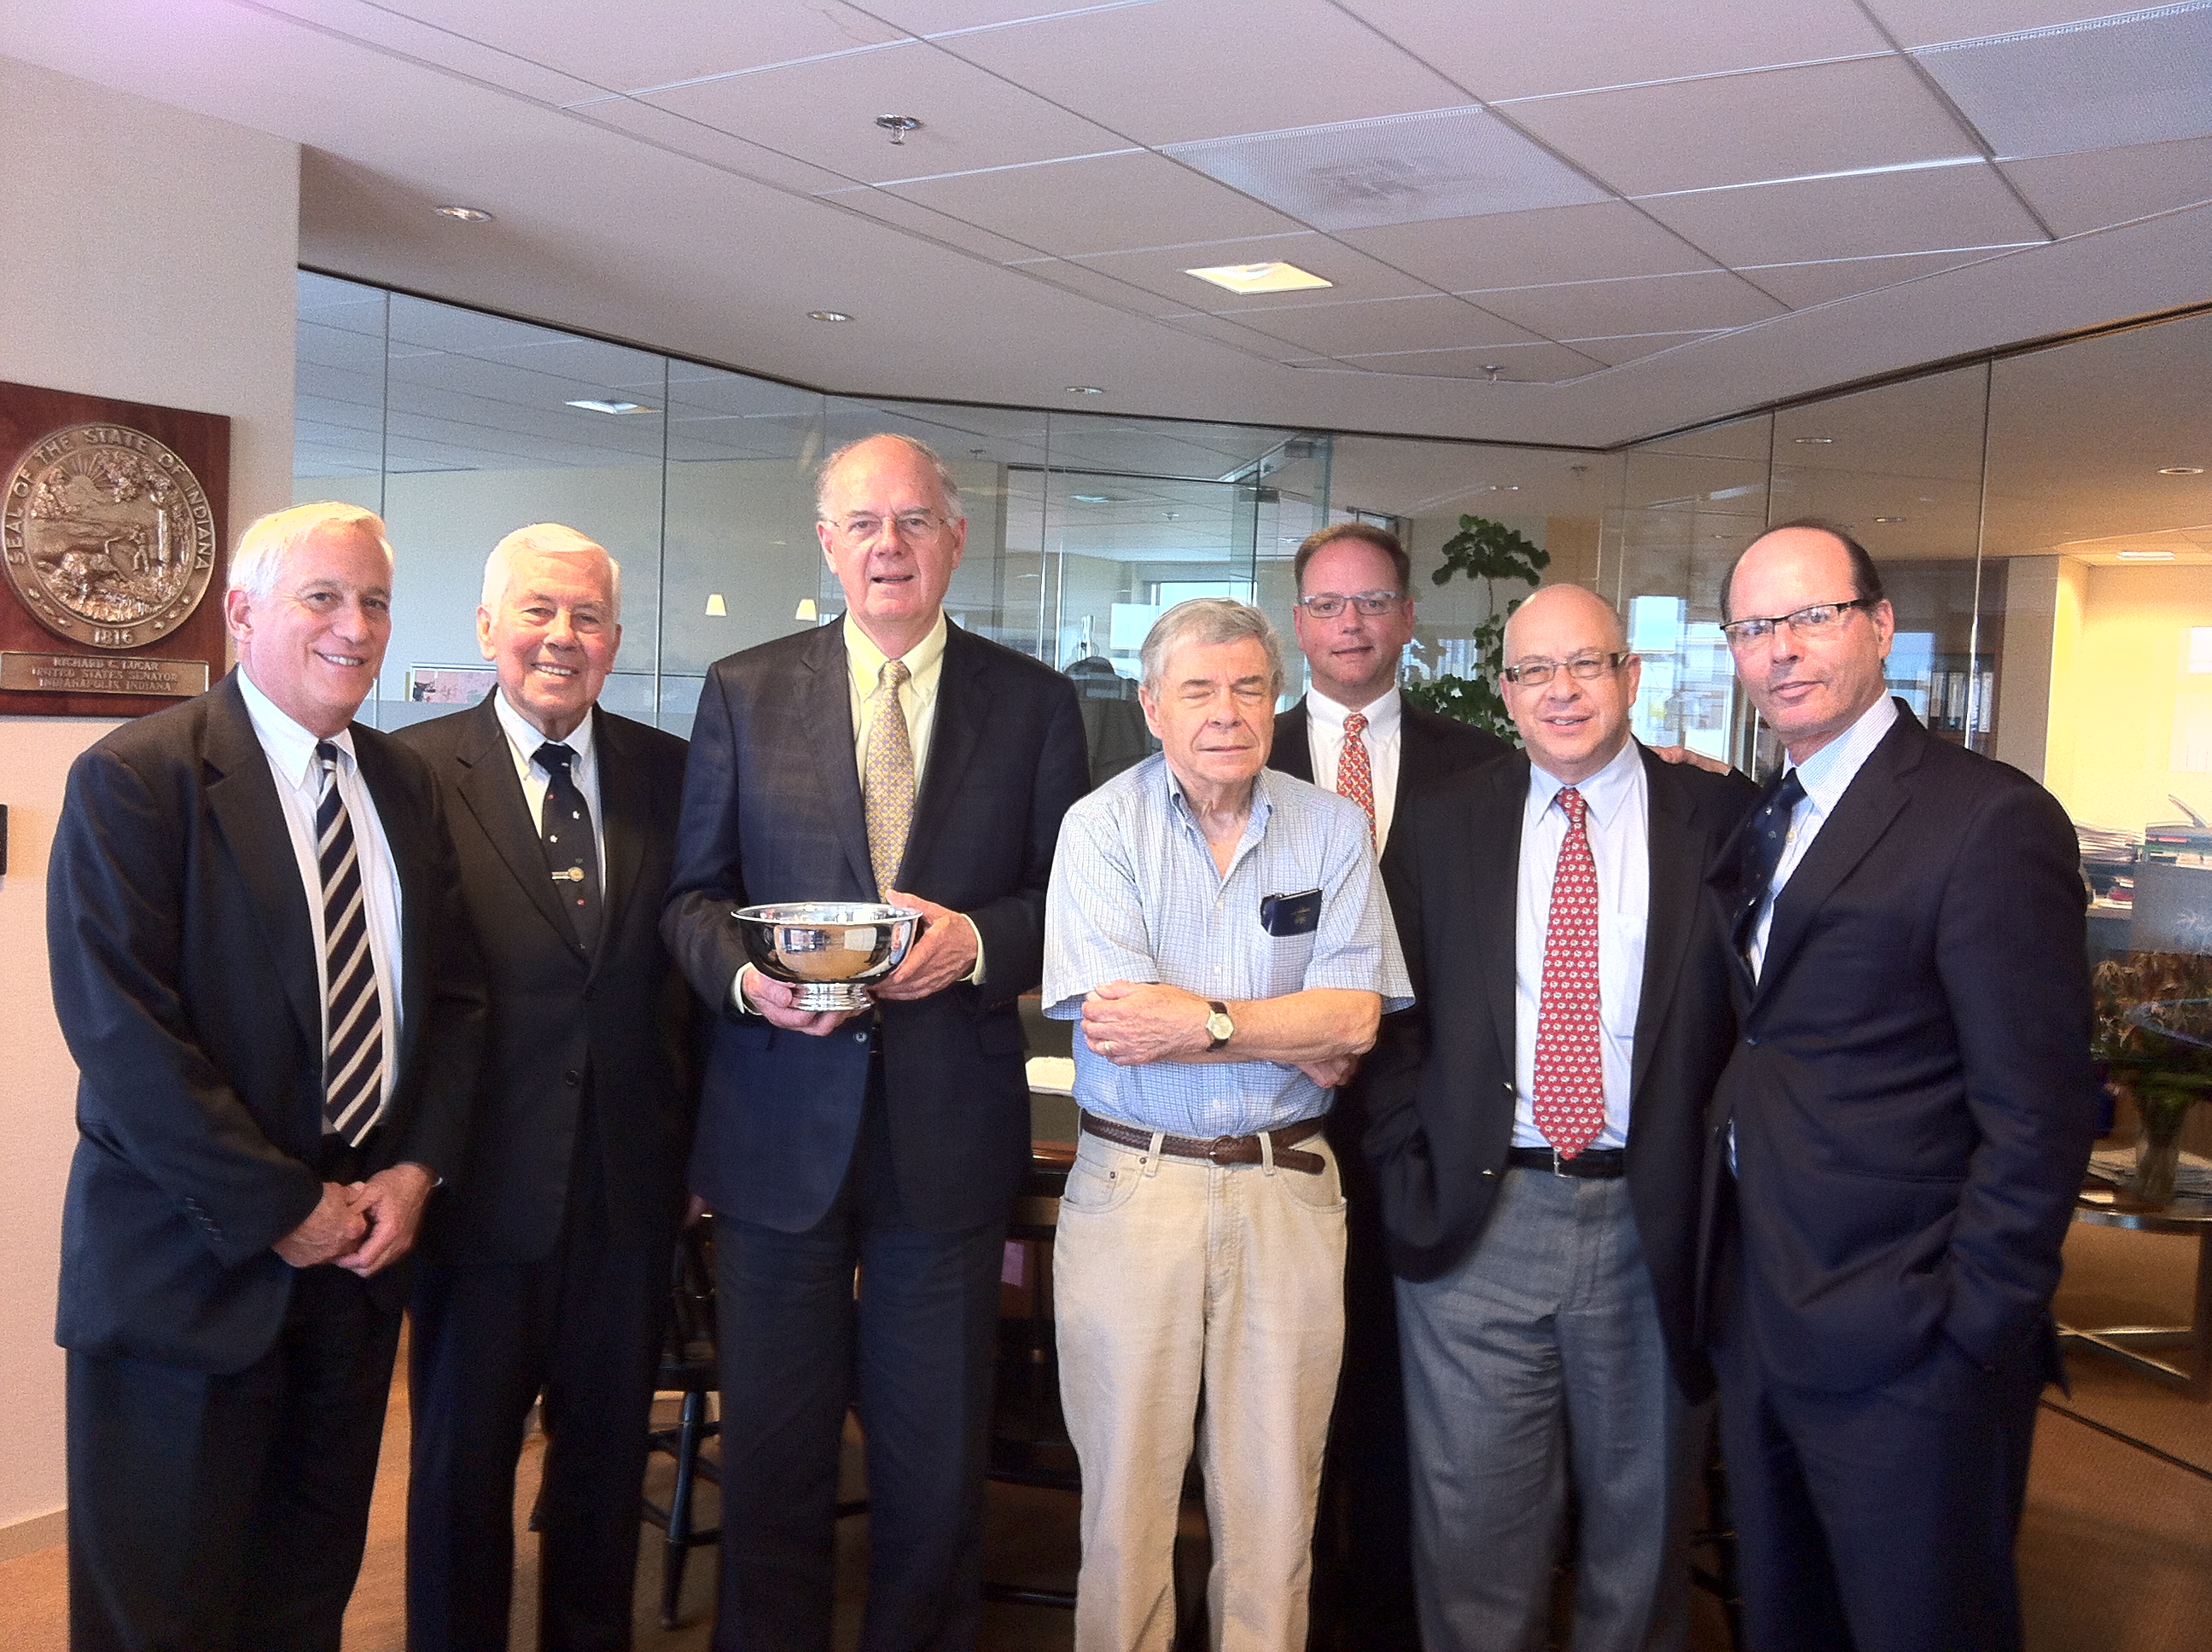 L to R: Walter Isaacson ’74, Dick Lugar ’54, Giles Henderson (with Revere bowl), Revan Tranter ’54, Bradley Peacock ’92, Andrew Seton, Tom Herman ’71 (missing: Neil Arnold ’66, Jim Bratton ’52, and Michelle Peluso ’93)